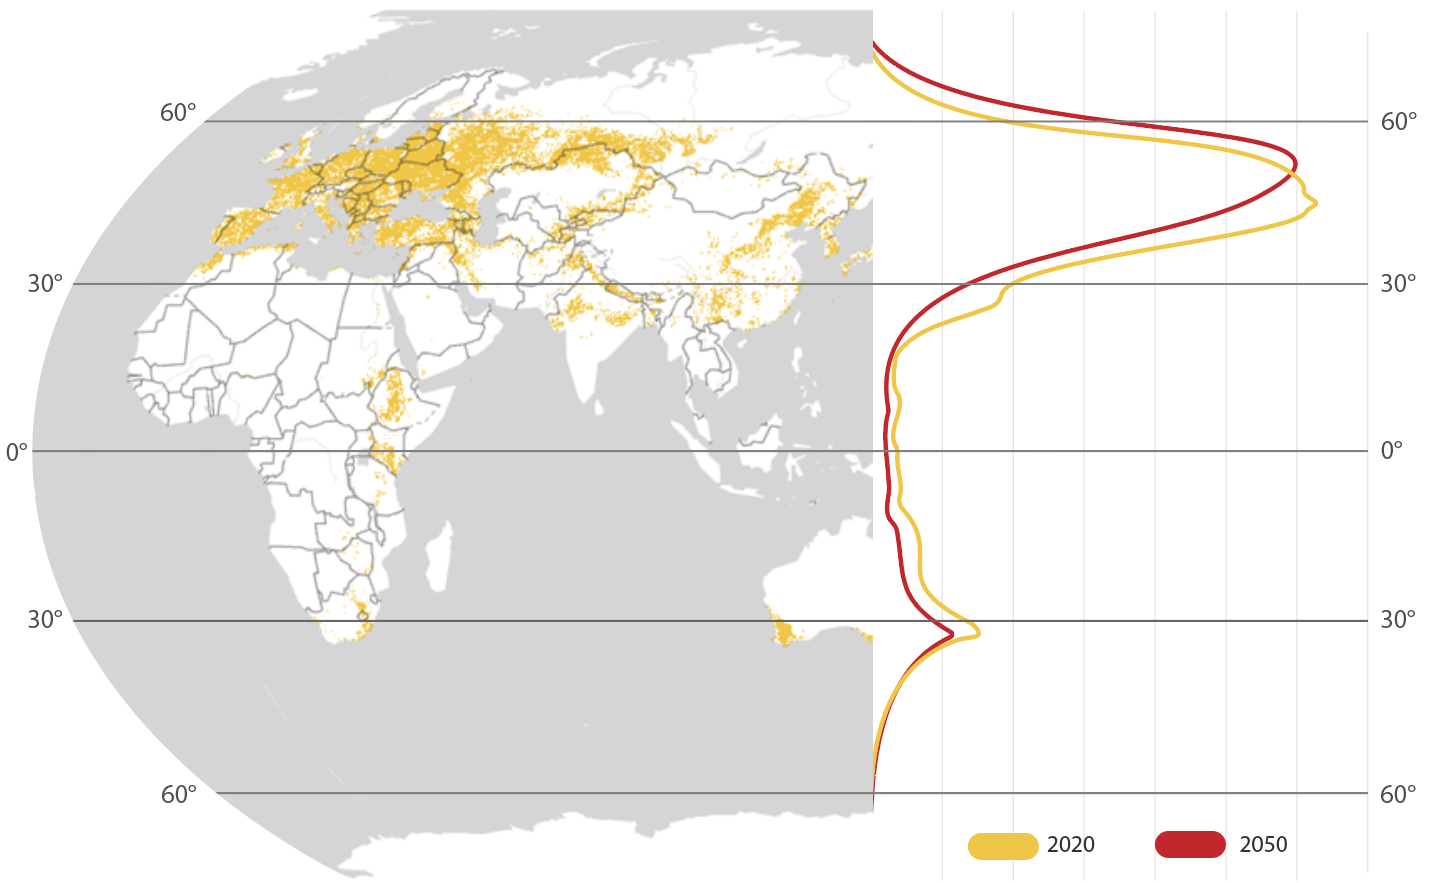 Current wheat extent is visualized on the map, and the accompanying chart shows the latitudinal shifts as a result of climate change. The latitudinal suitability shown in this chart is derived from the summation of predictive suitability values within each degree of latitude.